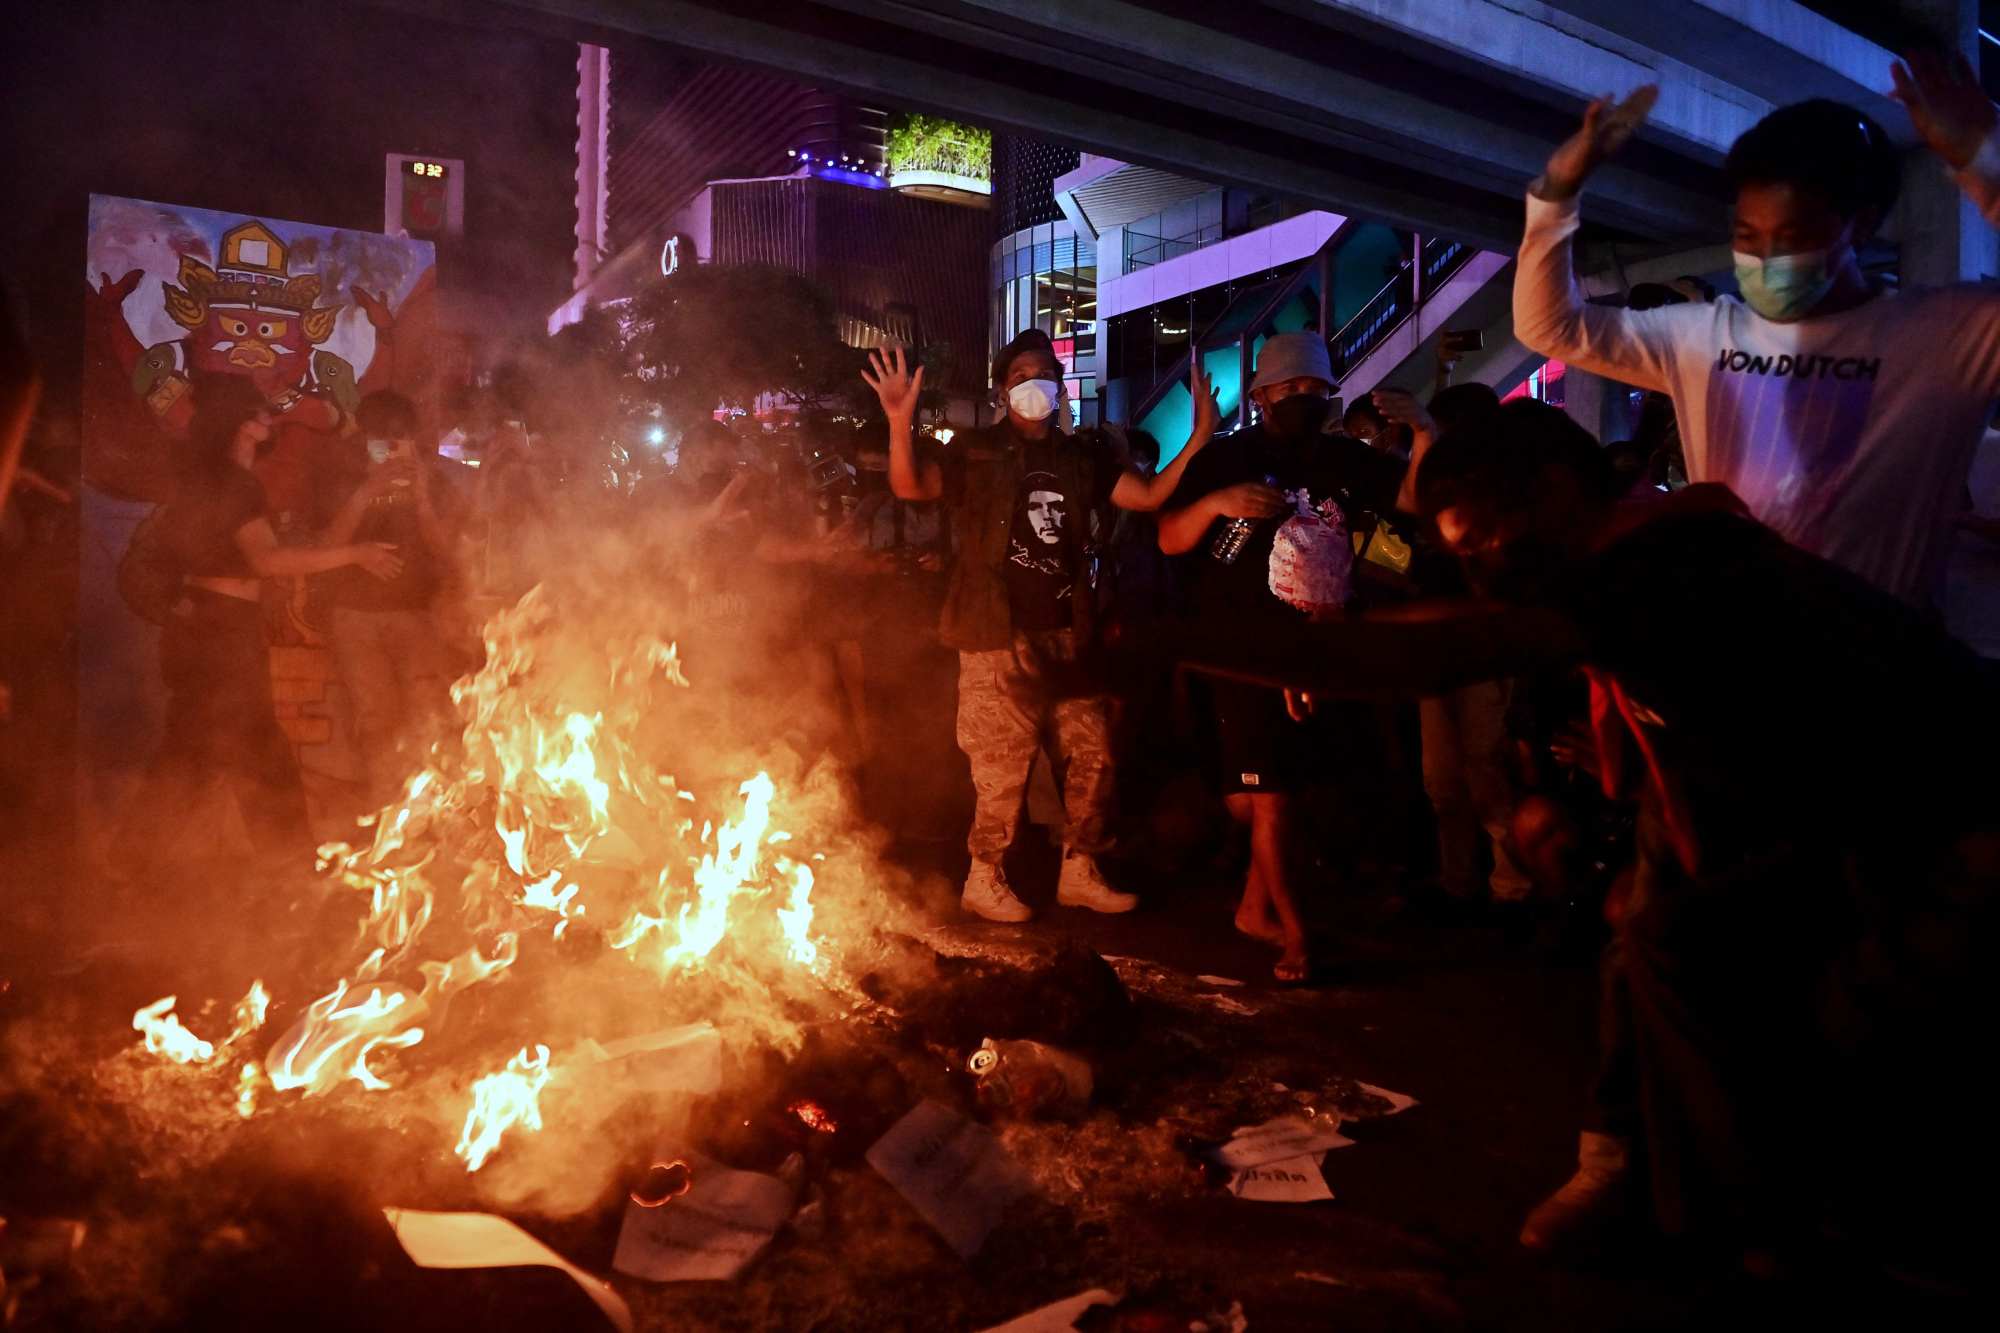 Protesters dance around a fire during a demonstration calling for the resignation of Thailand’s Prime Minister Prayuth Chan-Ocha over the government’s handling of the Covid-19 pandemic. Photo: AFP